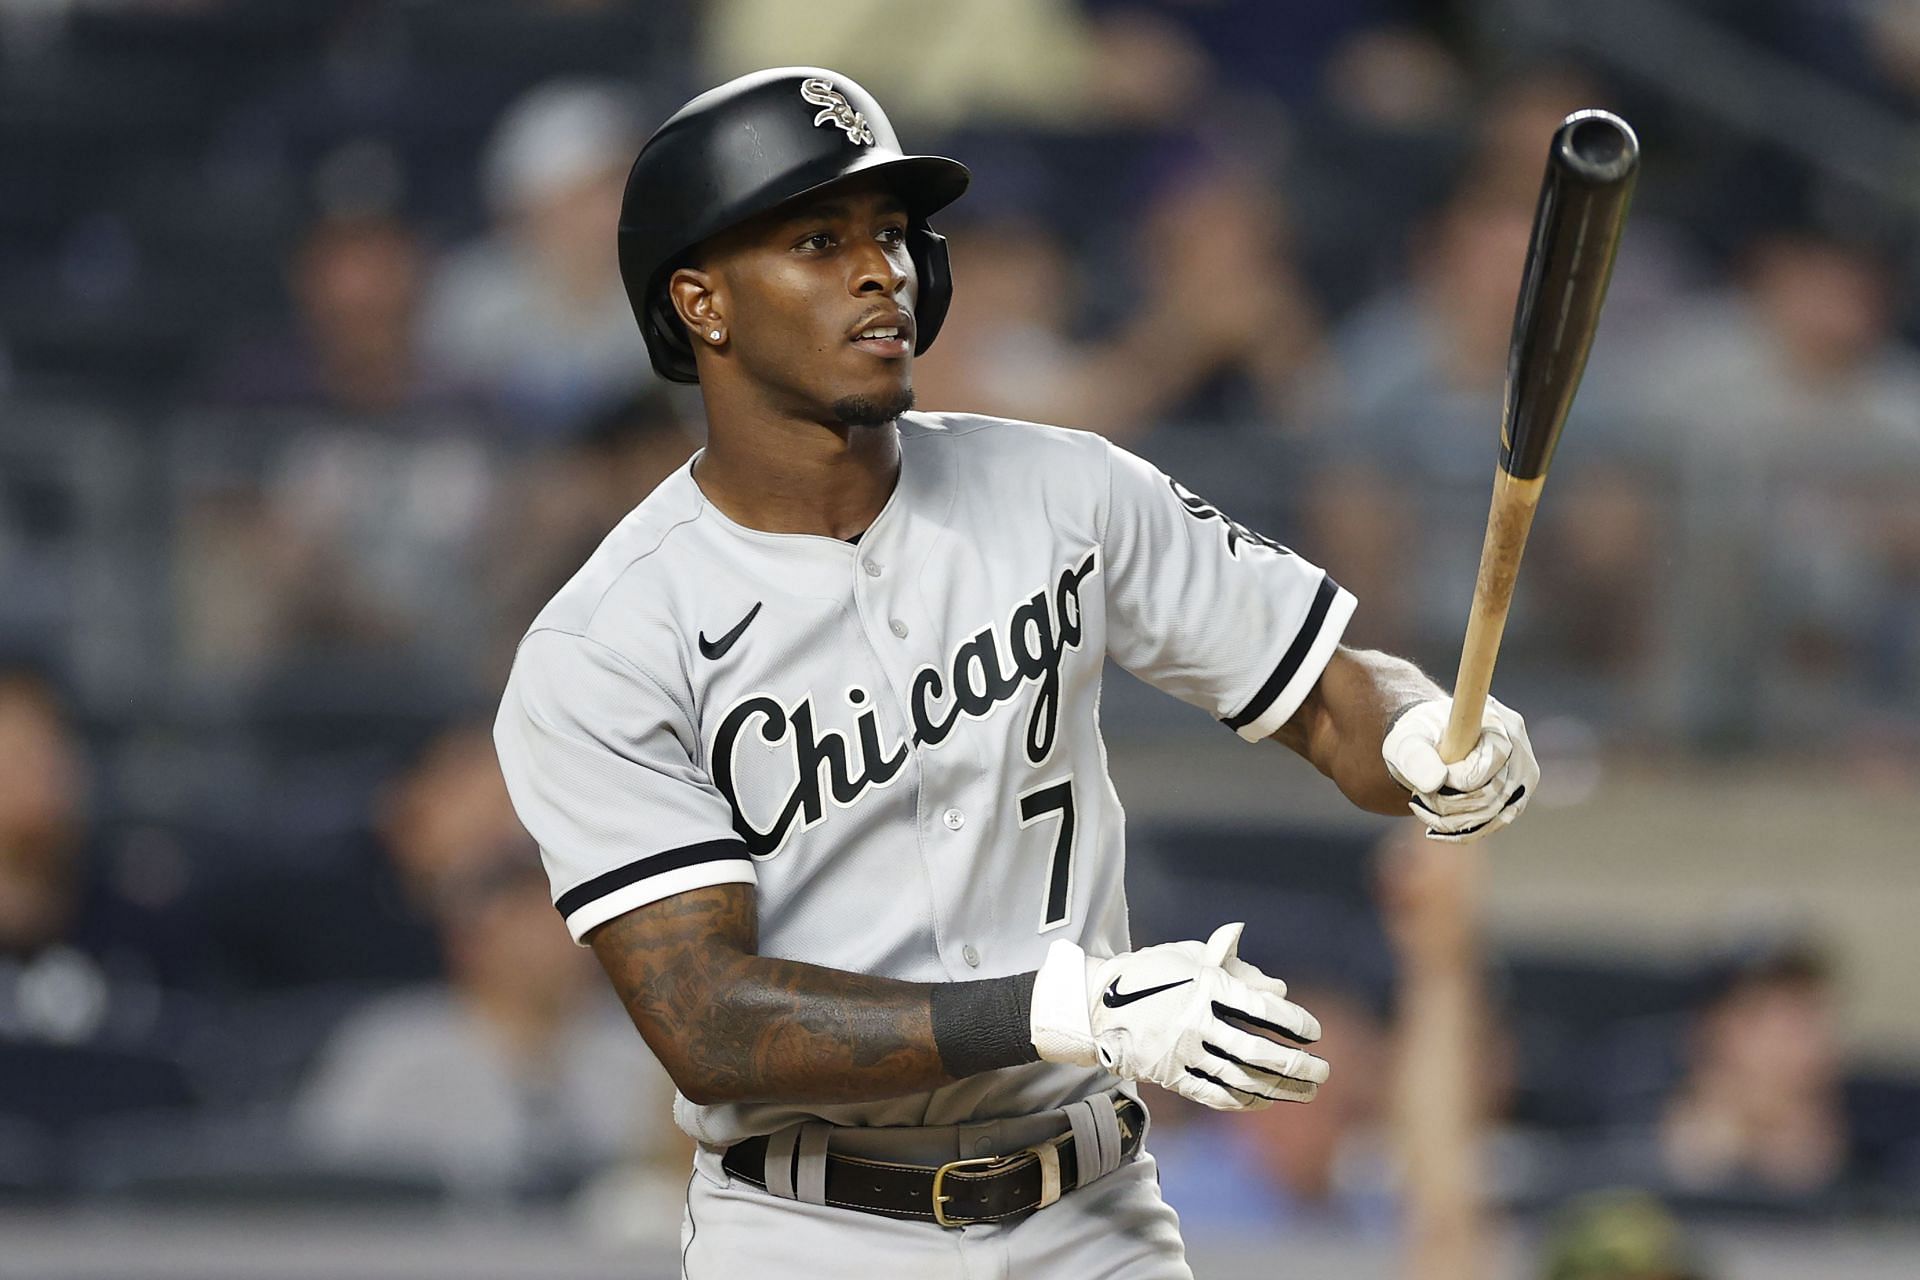 TIM ANDERSON SHARES FIRST PHOTO OF HIS SON: 'EVERYBODY AIN'T GOTTA KNOW  EVERYTHING